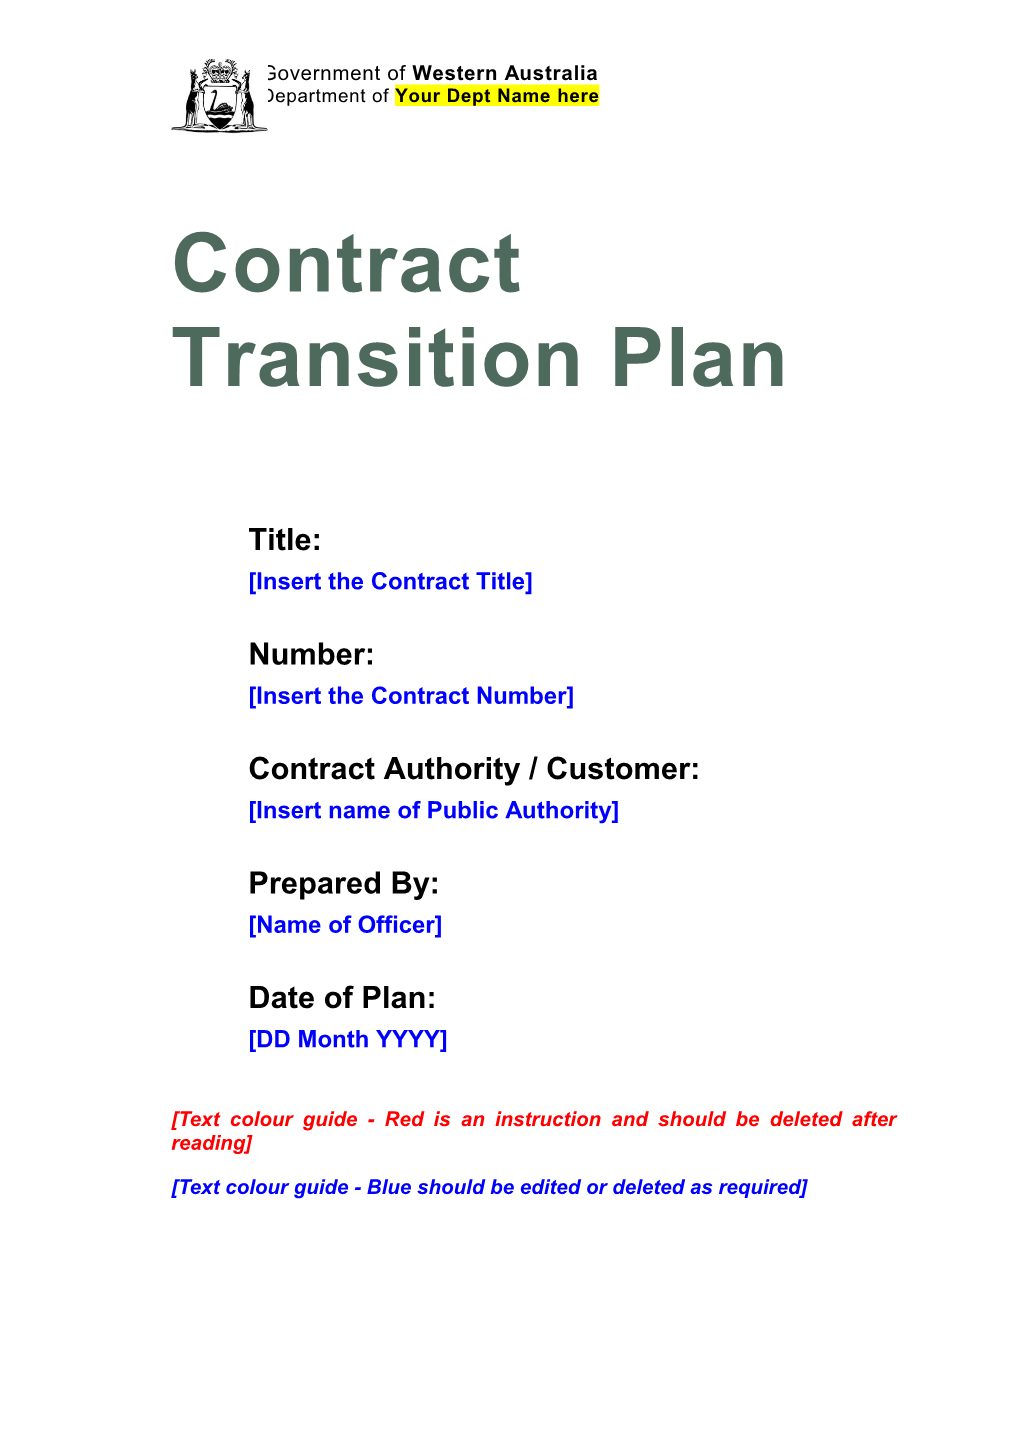 Contract Transition Plan